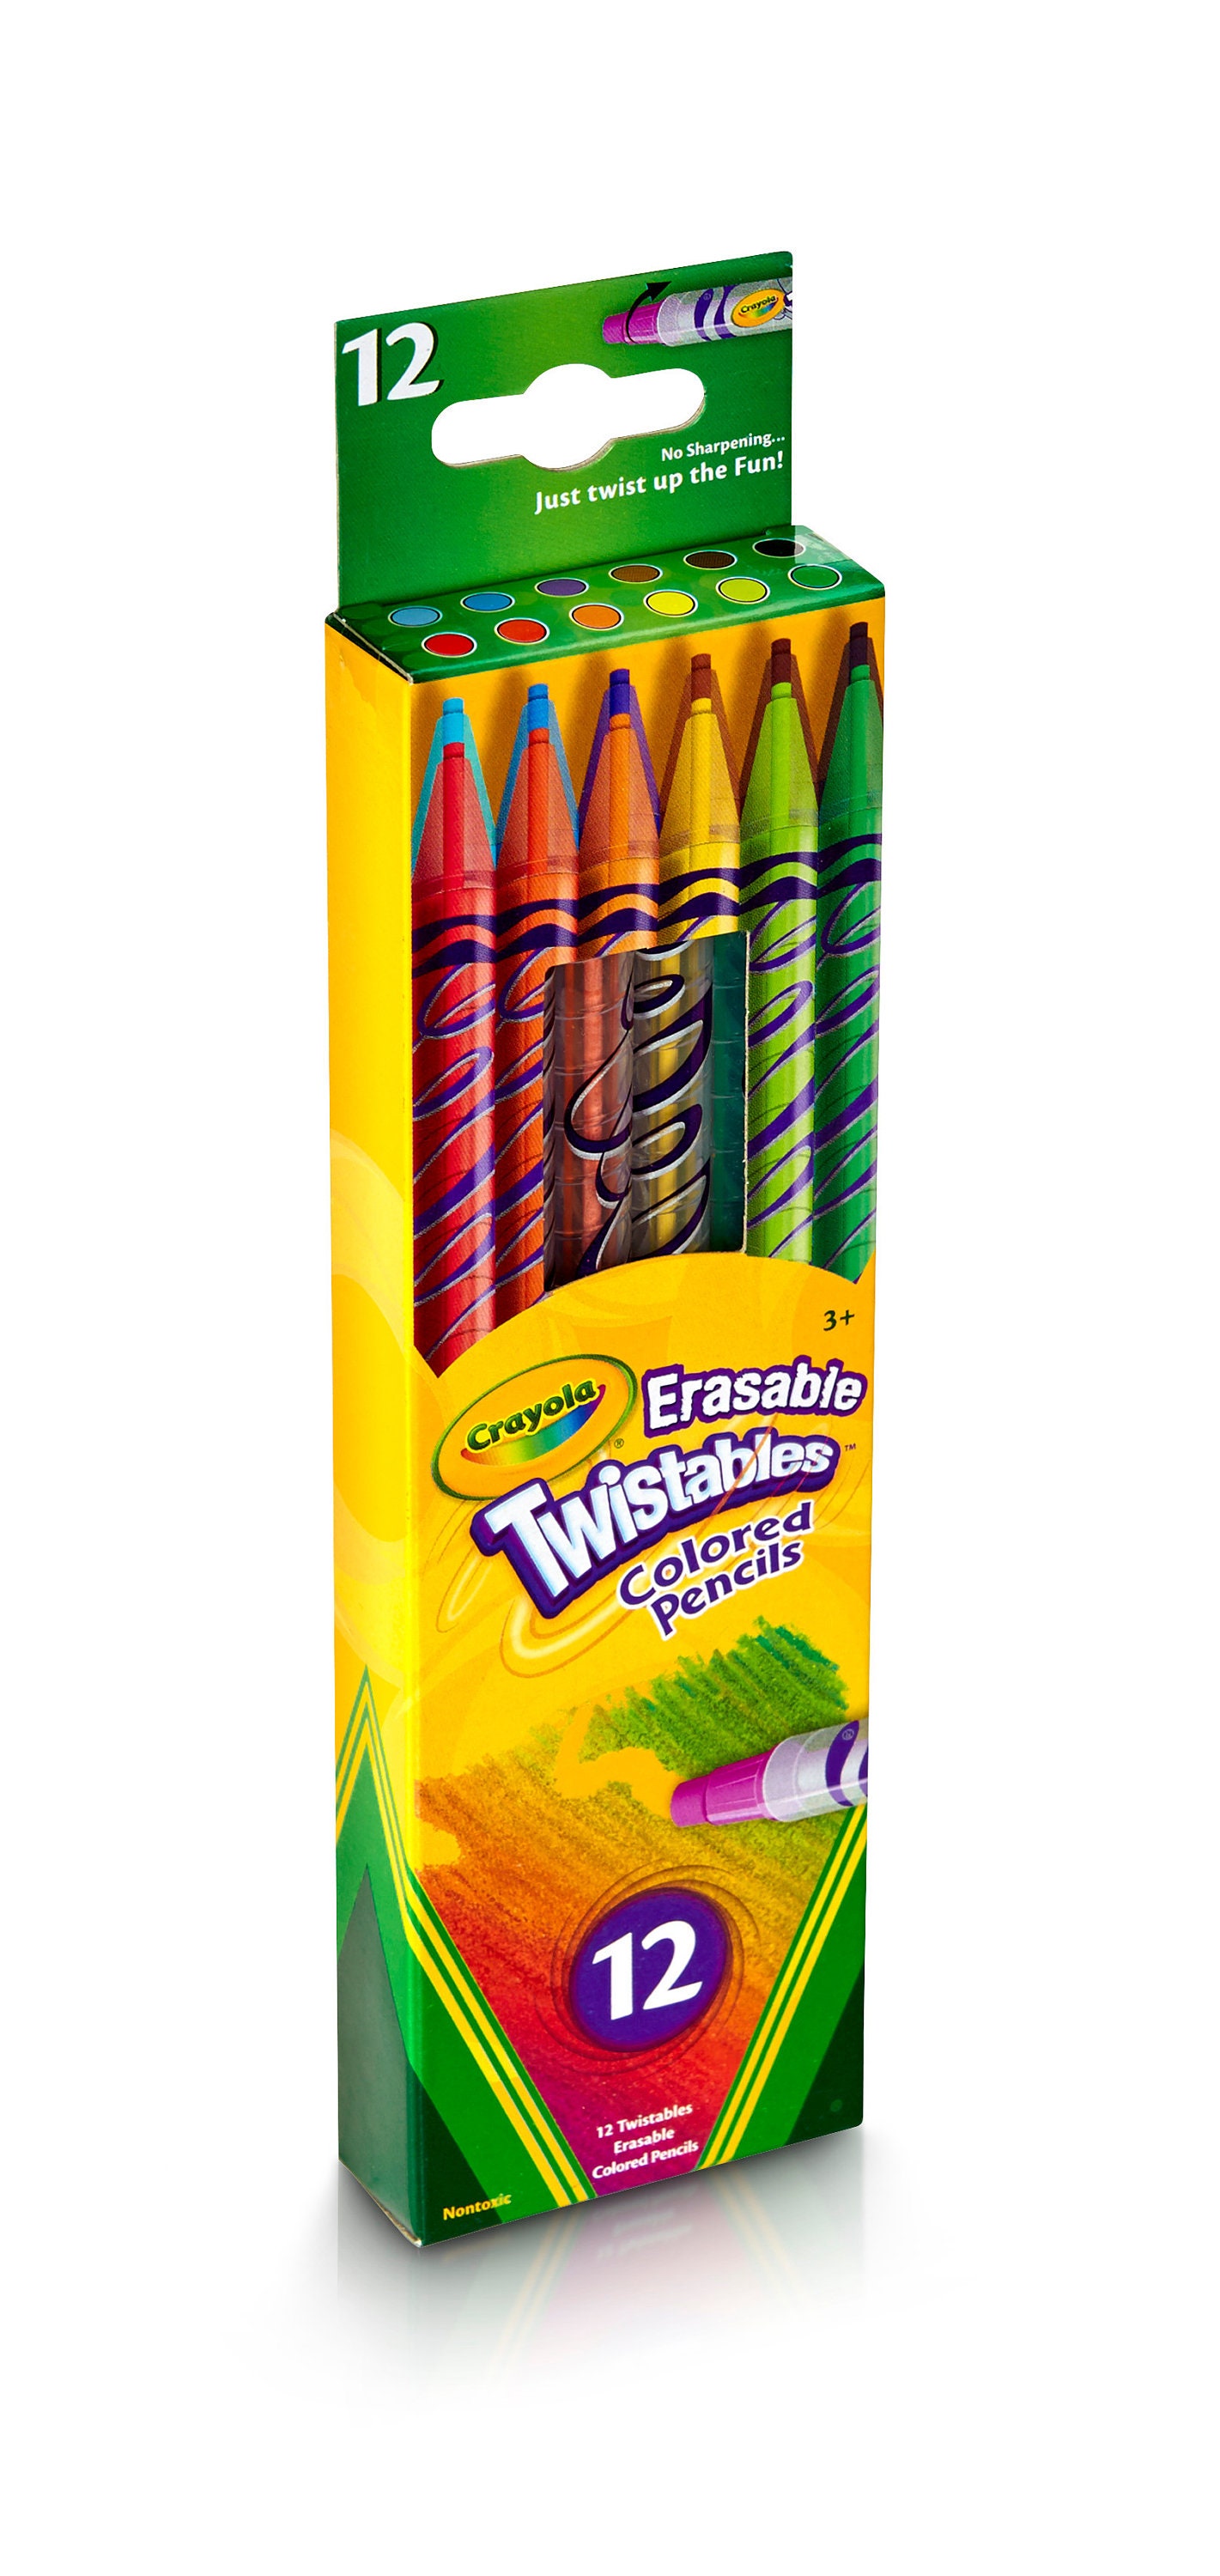 18 Crayola Twistables Colored Pencils Adult Coloring Books, Drawing, Bible  Study, Planner Color Pencils 